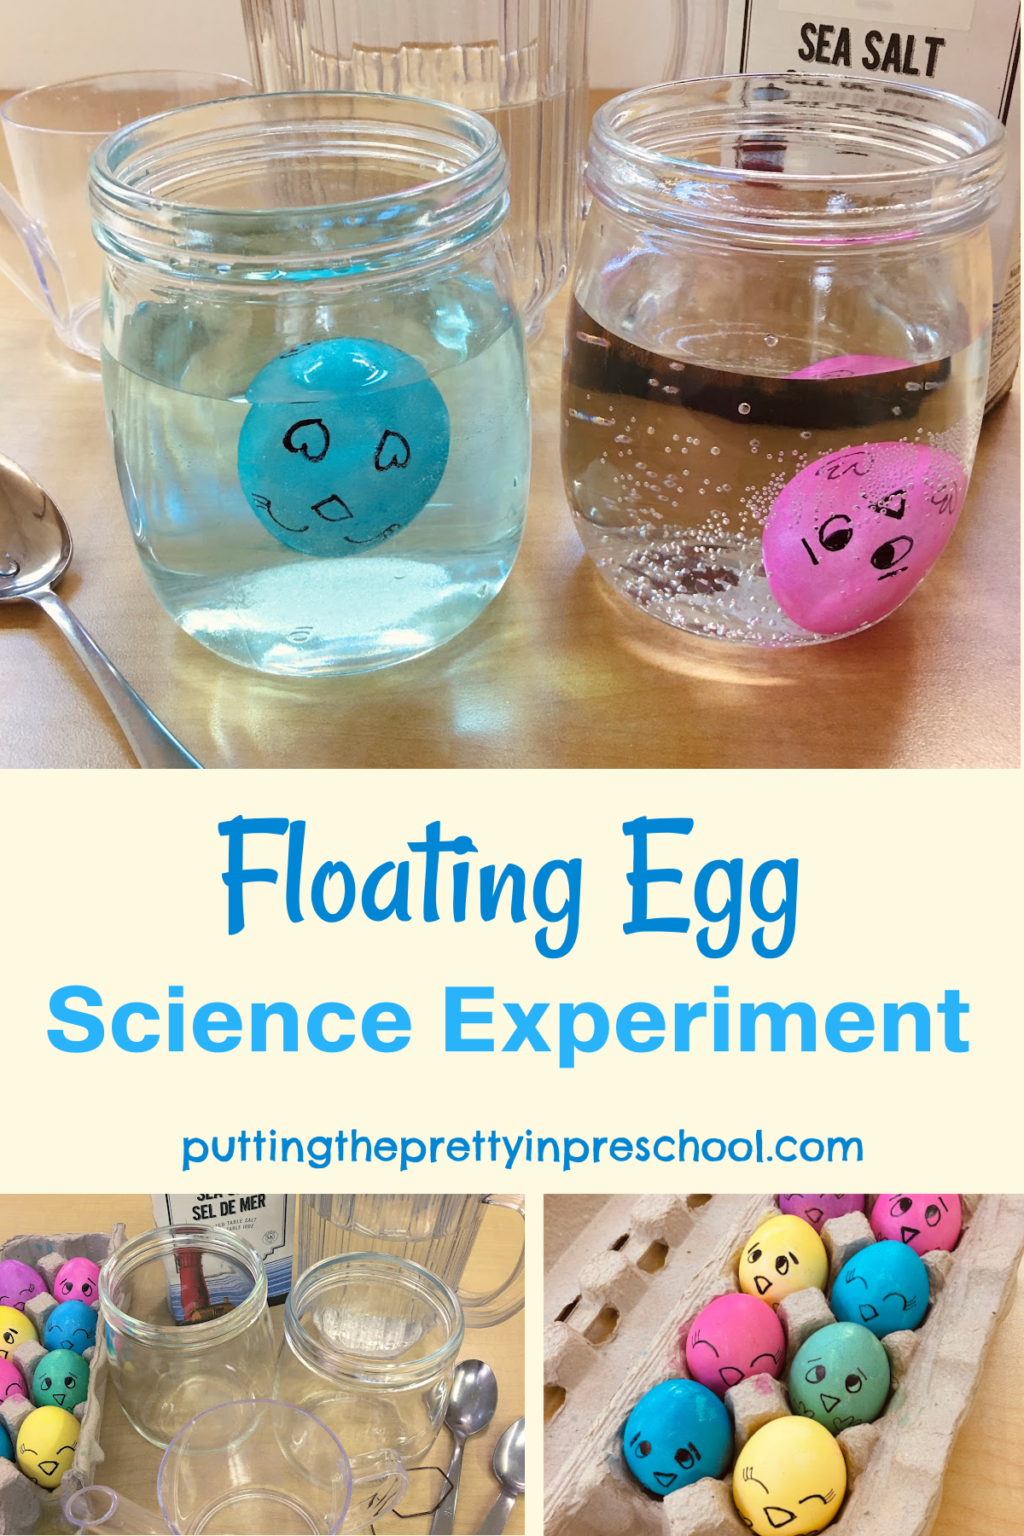 what is the hypothesis of floating egg science experiment